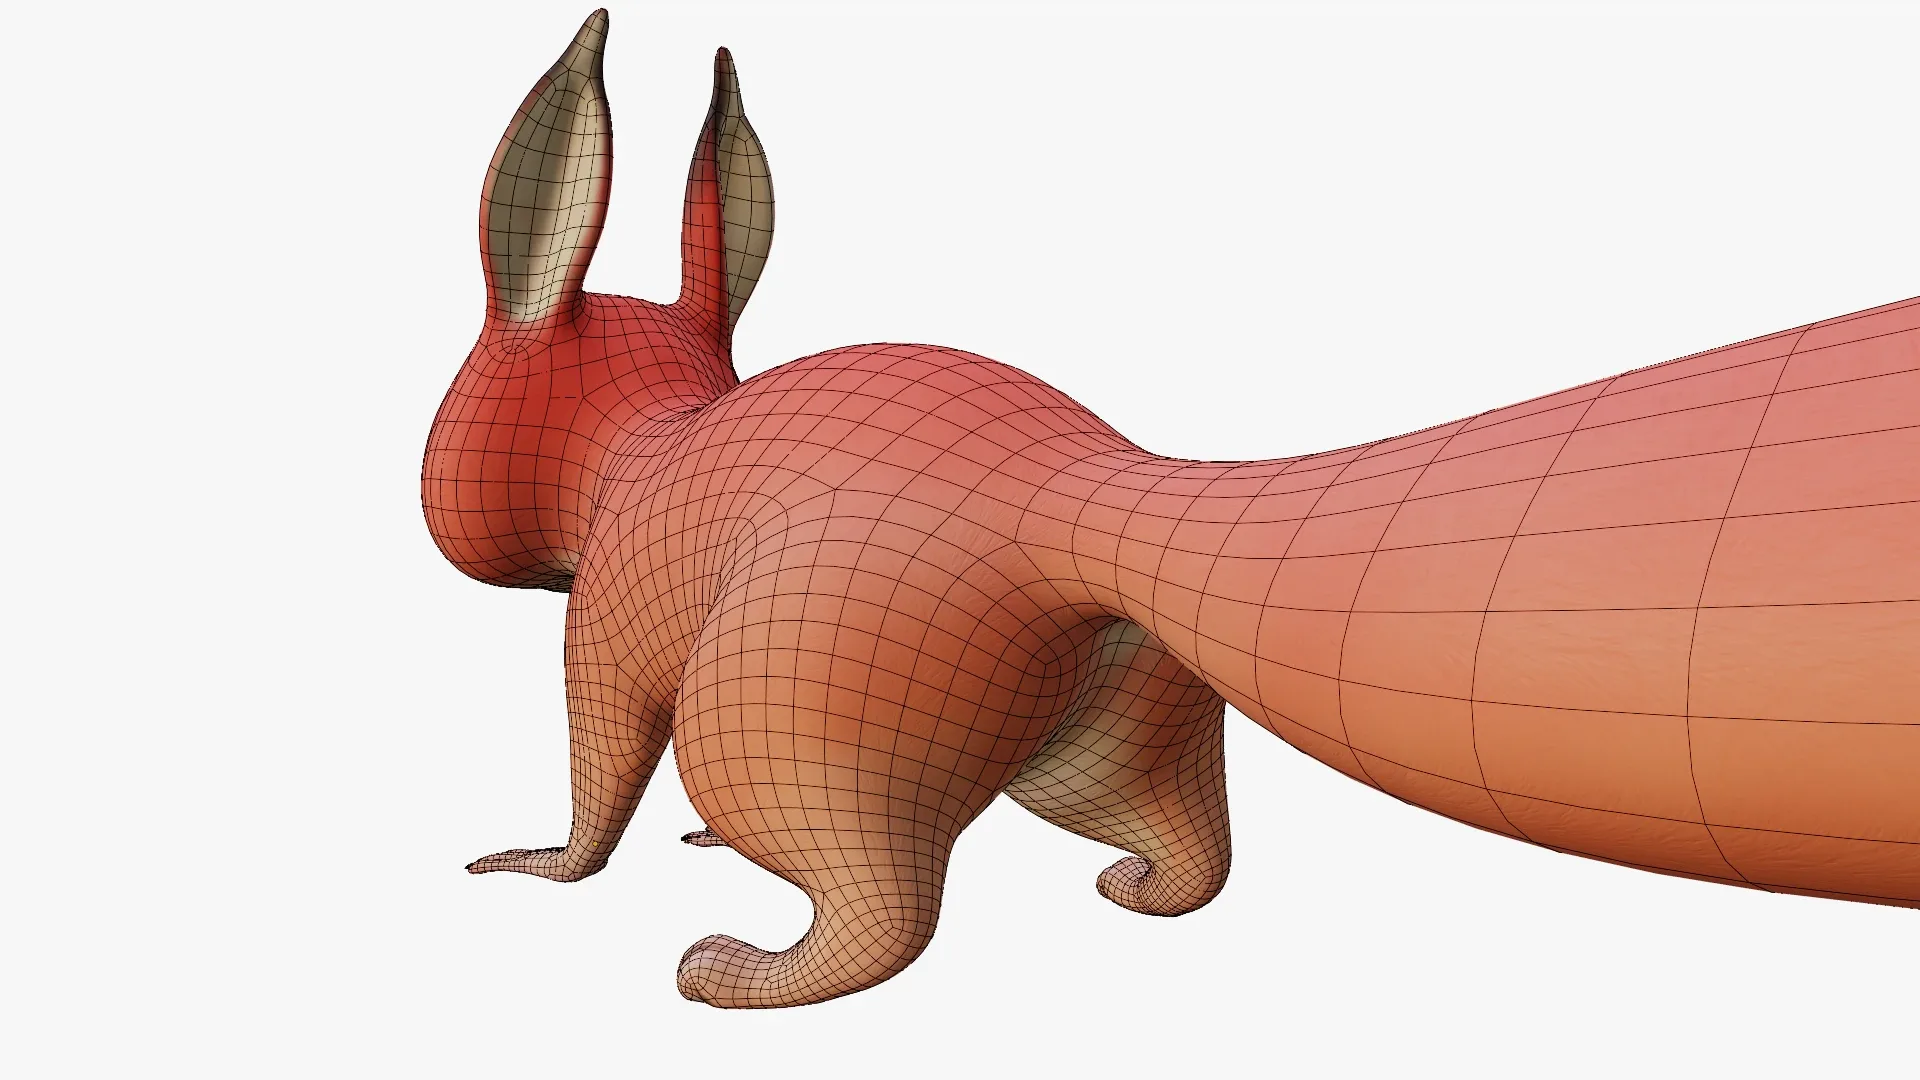 Squirrel - A stylized rigged animal for Blender